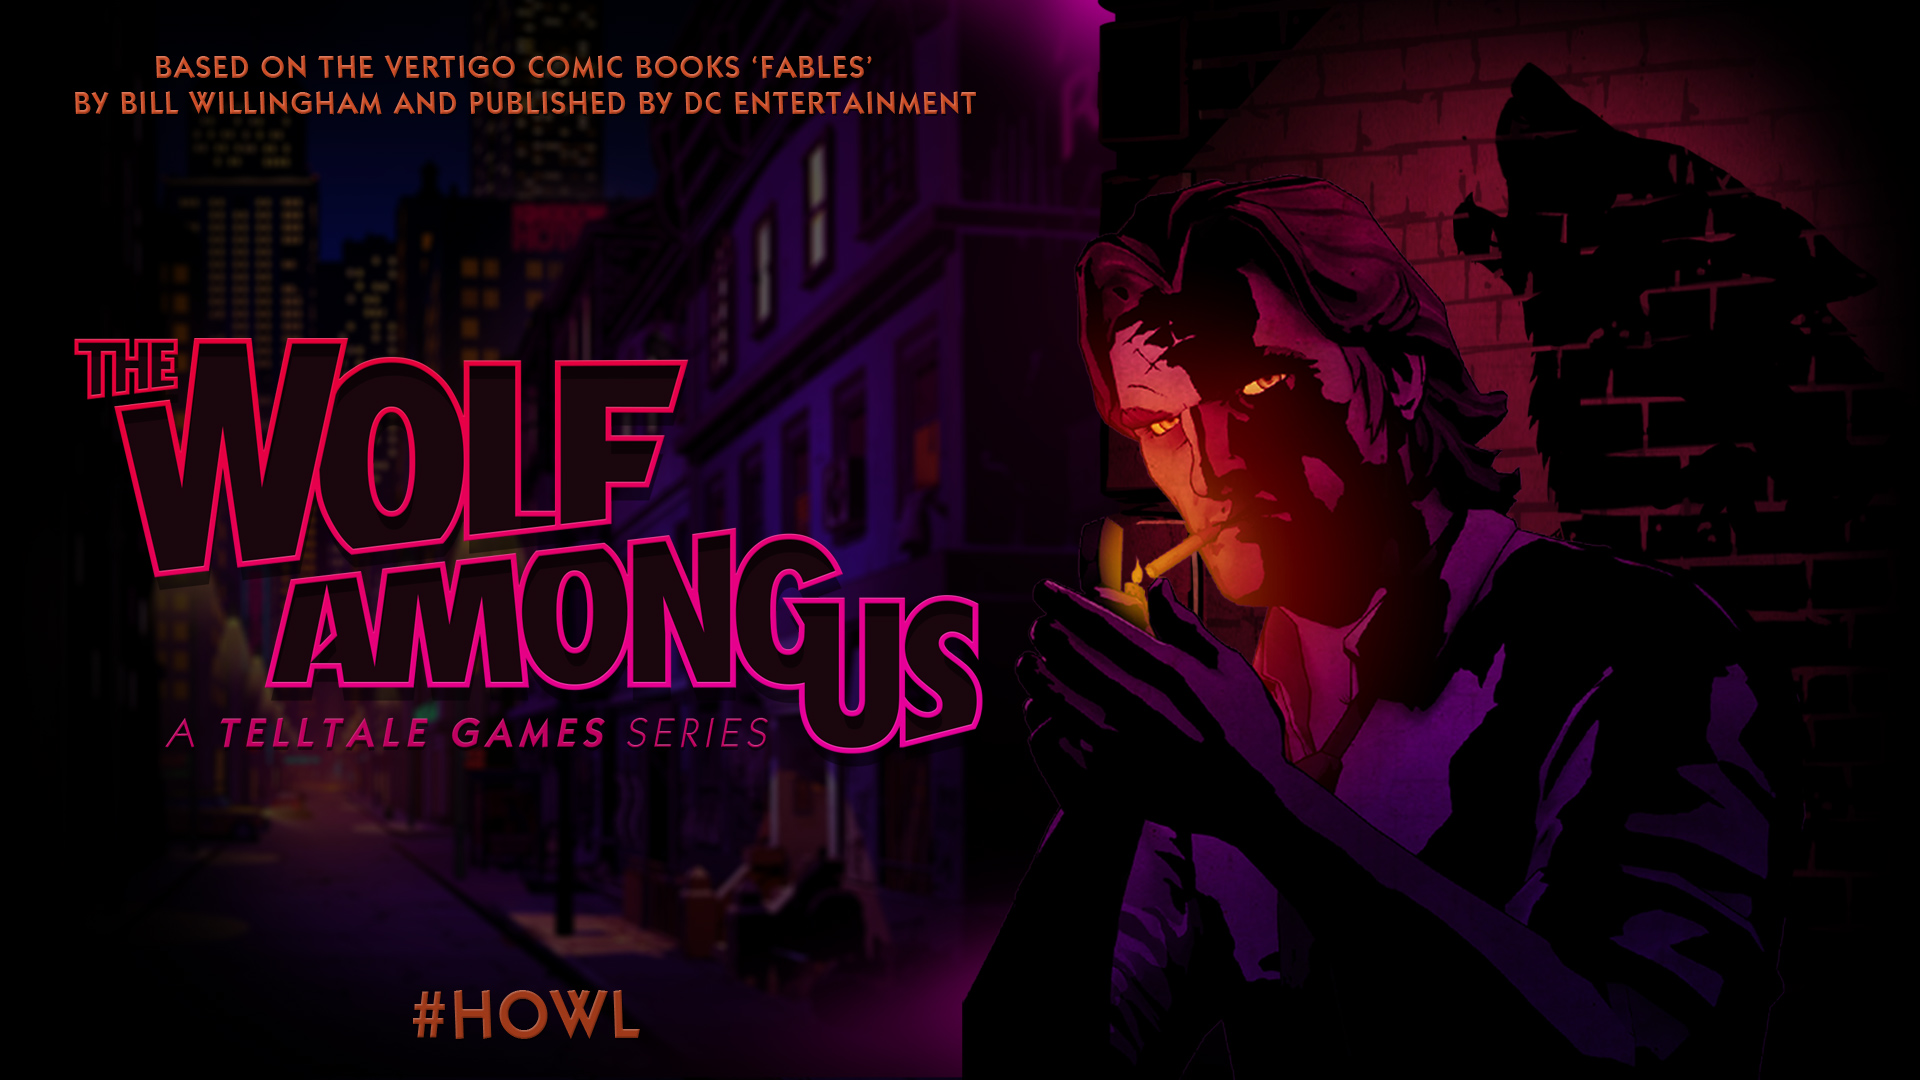  The Wolf Among Us - Xbox 360 : Ui Entertainment: Video Games